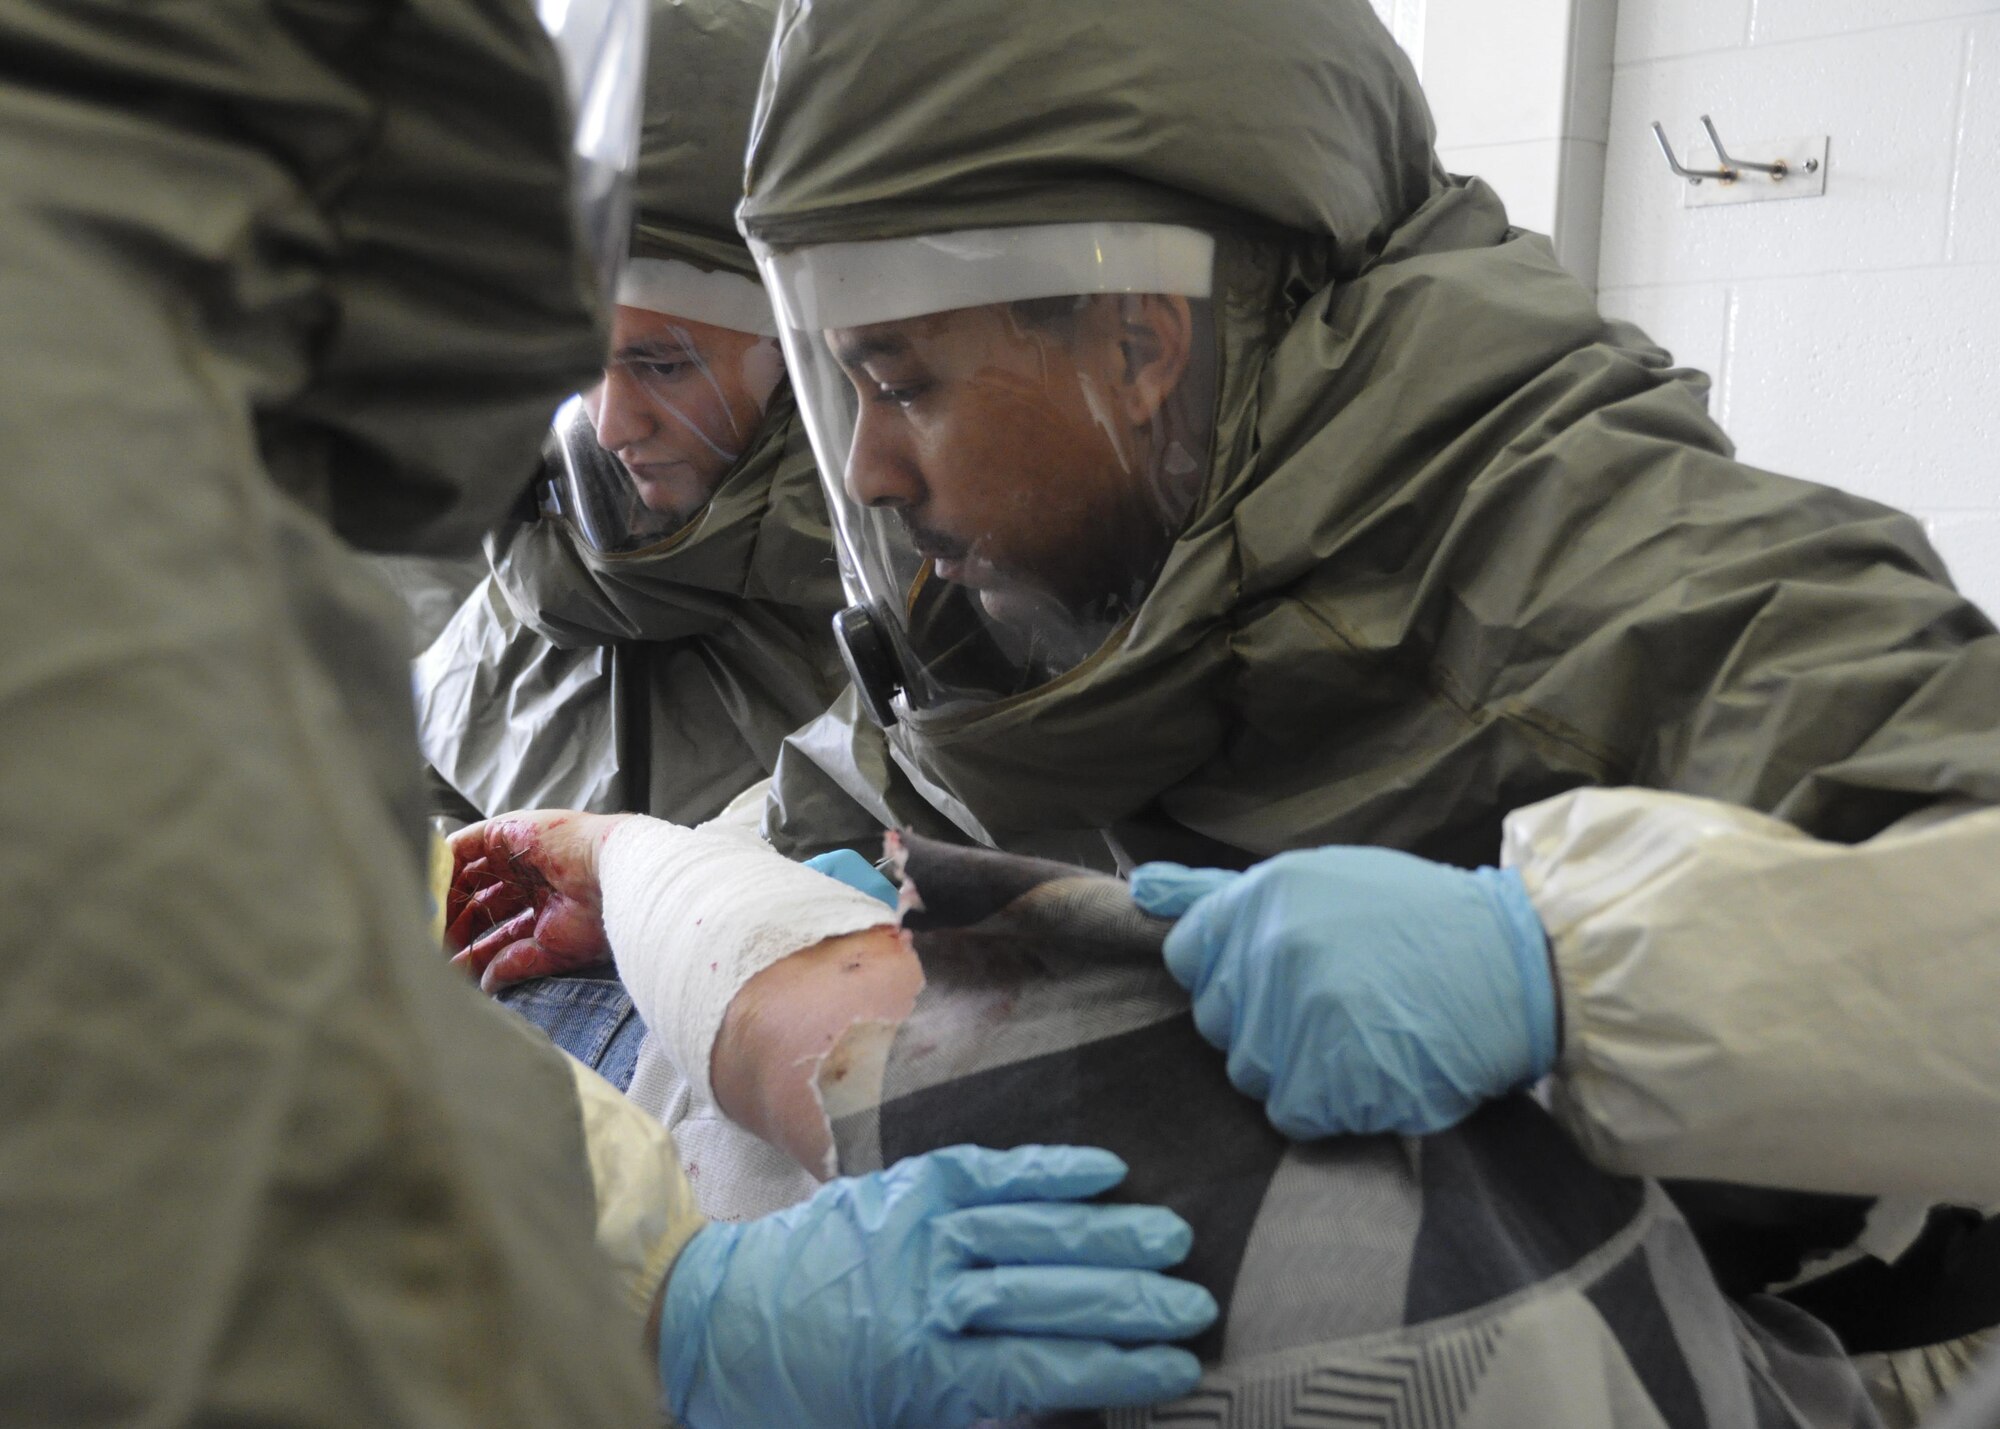 U.S. Air Force Airman 1st Class Chris Stangl, right, a public health technician, and Senior Airman Dylan Kielcheski, an aerospace medical technician, both with the 509th Medical Operations Squadron, help hold a volunteer victim on their side to decontaminate all areas of the victim during a total force mass casualty exercise at Whiteman Air Force Base, Mo., Dec. 3, 2016. Volunteer victims were brought through a decontamination line before being admitted into the clinic. (U.S. Air Force photo/Senior Airman Missy Sterling)